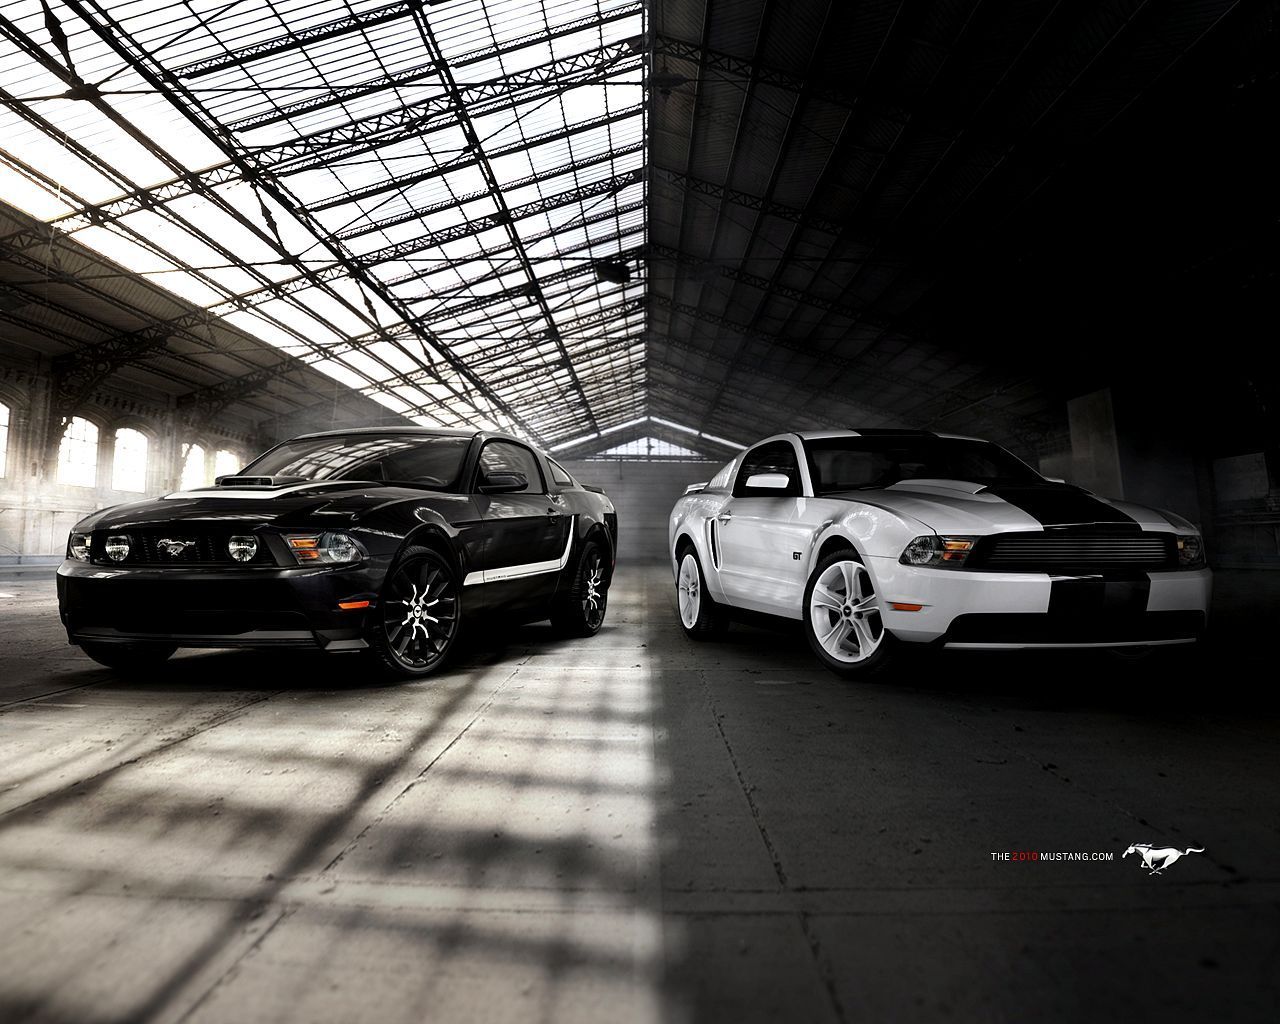 Ford Mustang Shelby Gt500 Wallpaper | 1280x800 | ID:28554